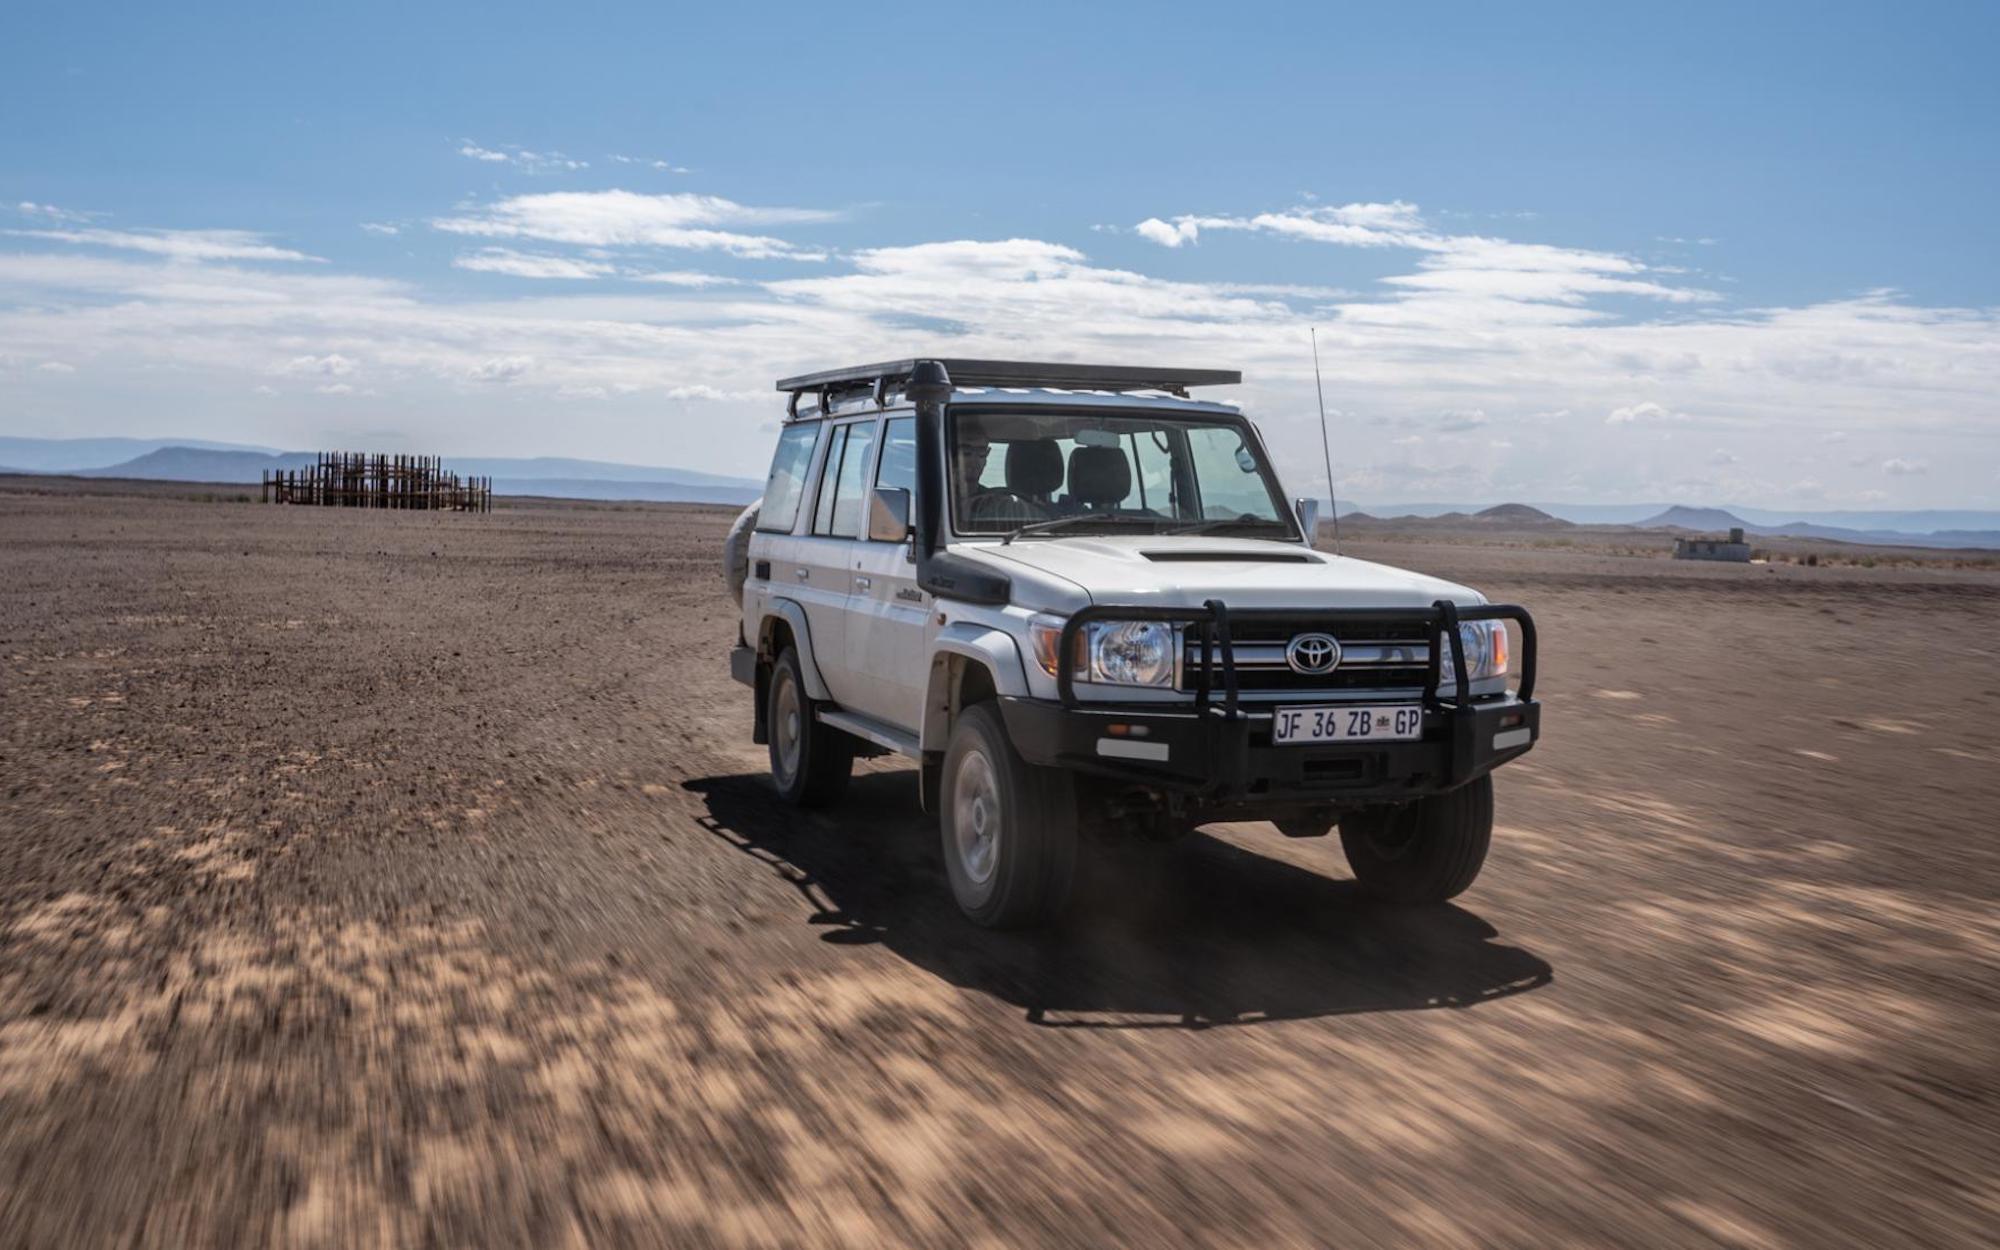 Top Gear Takes The Land Cruiser On A South African Adventure